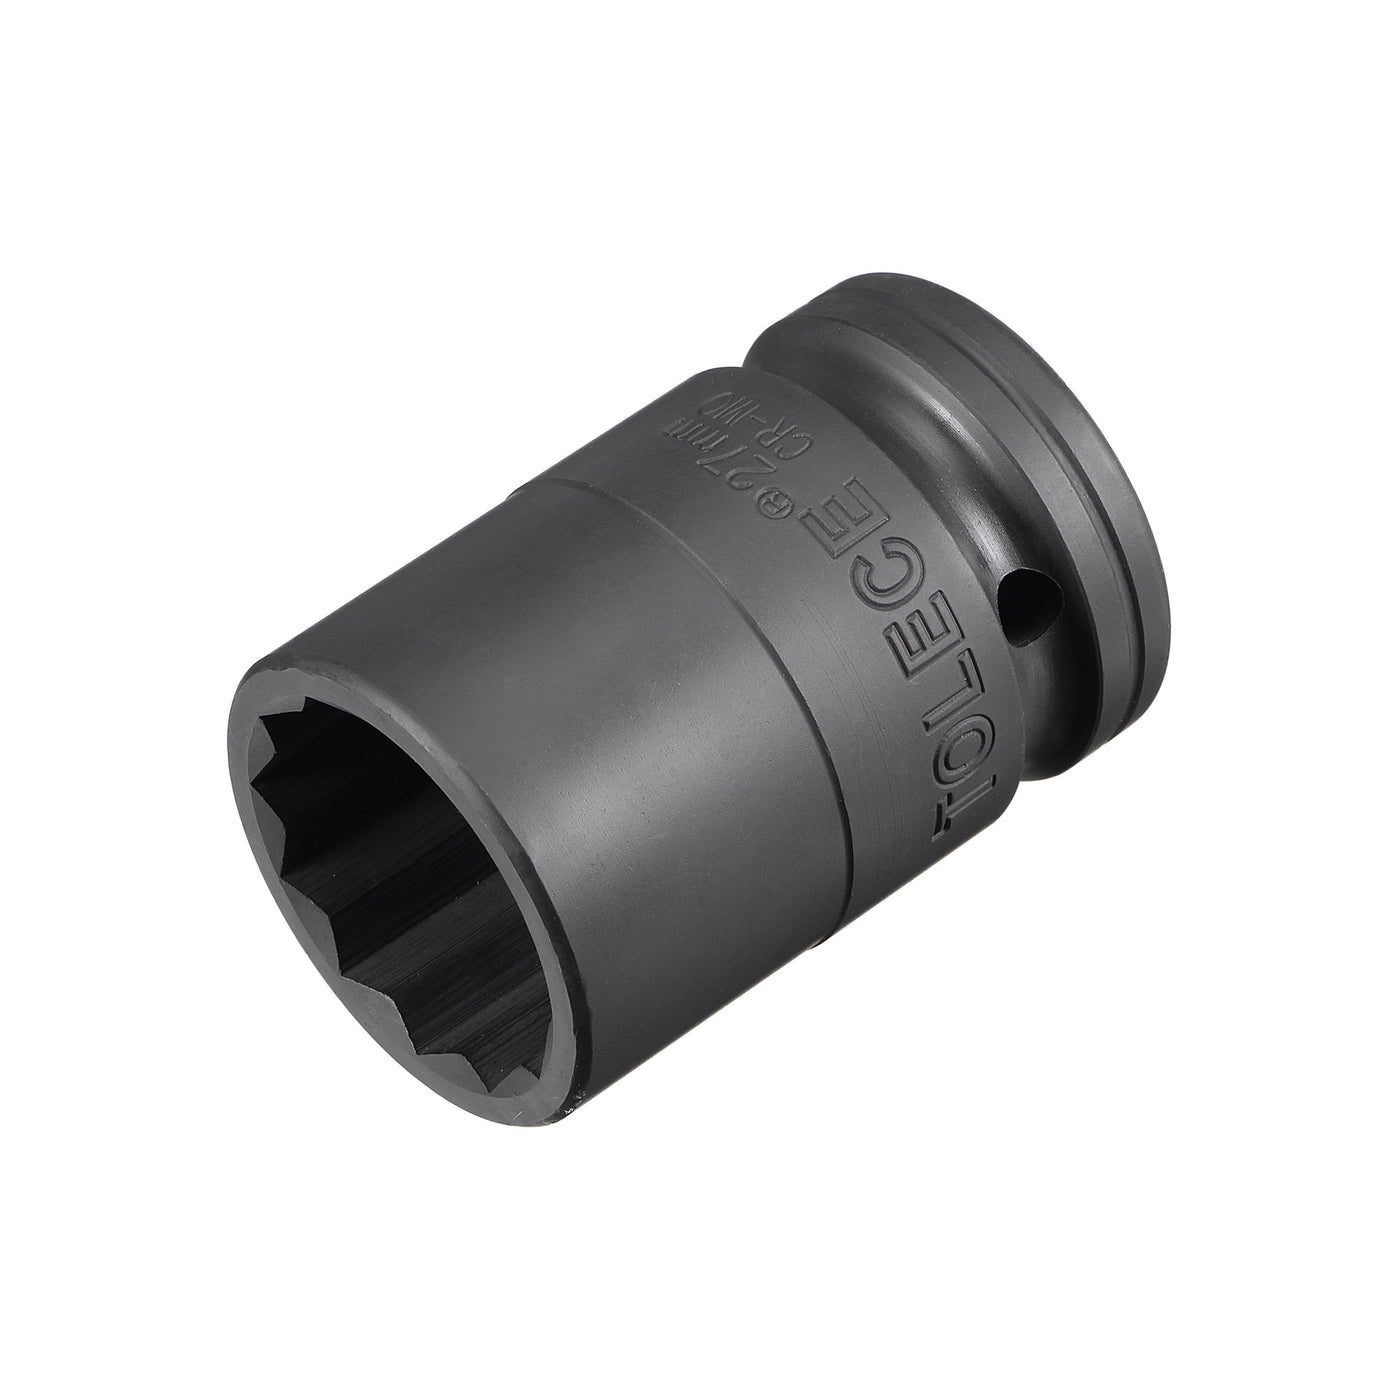 uxcell Uxcell 3/4" Drive 27mm 12-Point Impact Socket, CR-MO Steel 56mm Length, Standard Metric